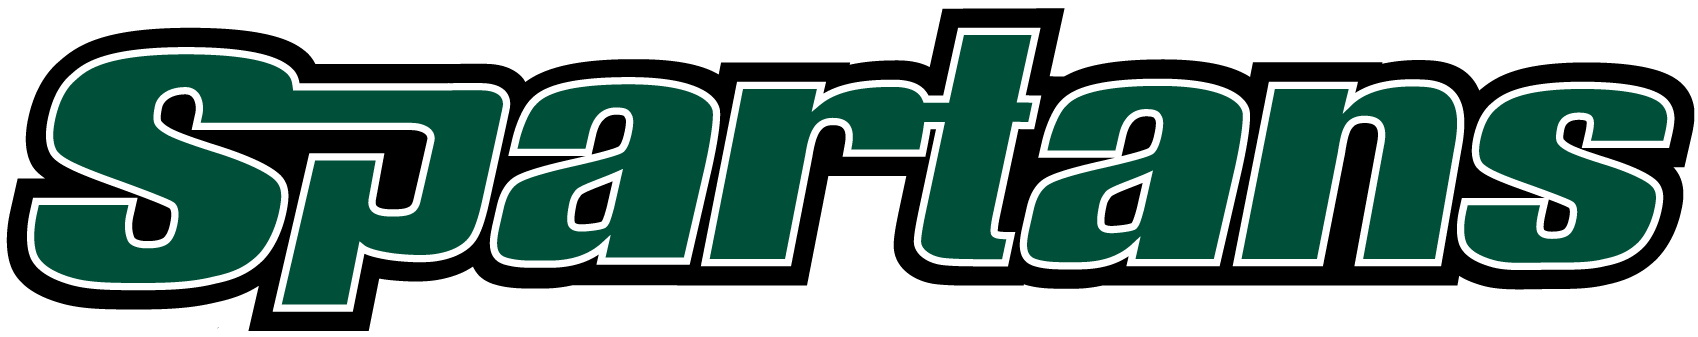 USC Upstate Spartans 2003-2010 Wordmark Logo iron on transfers for T-shirts